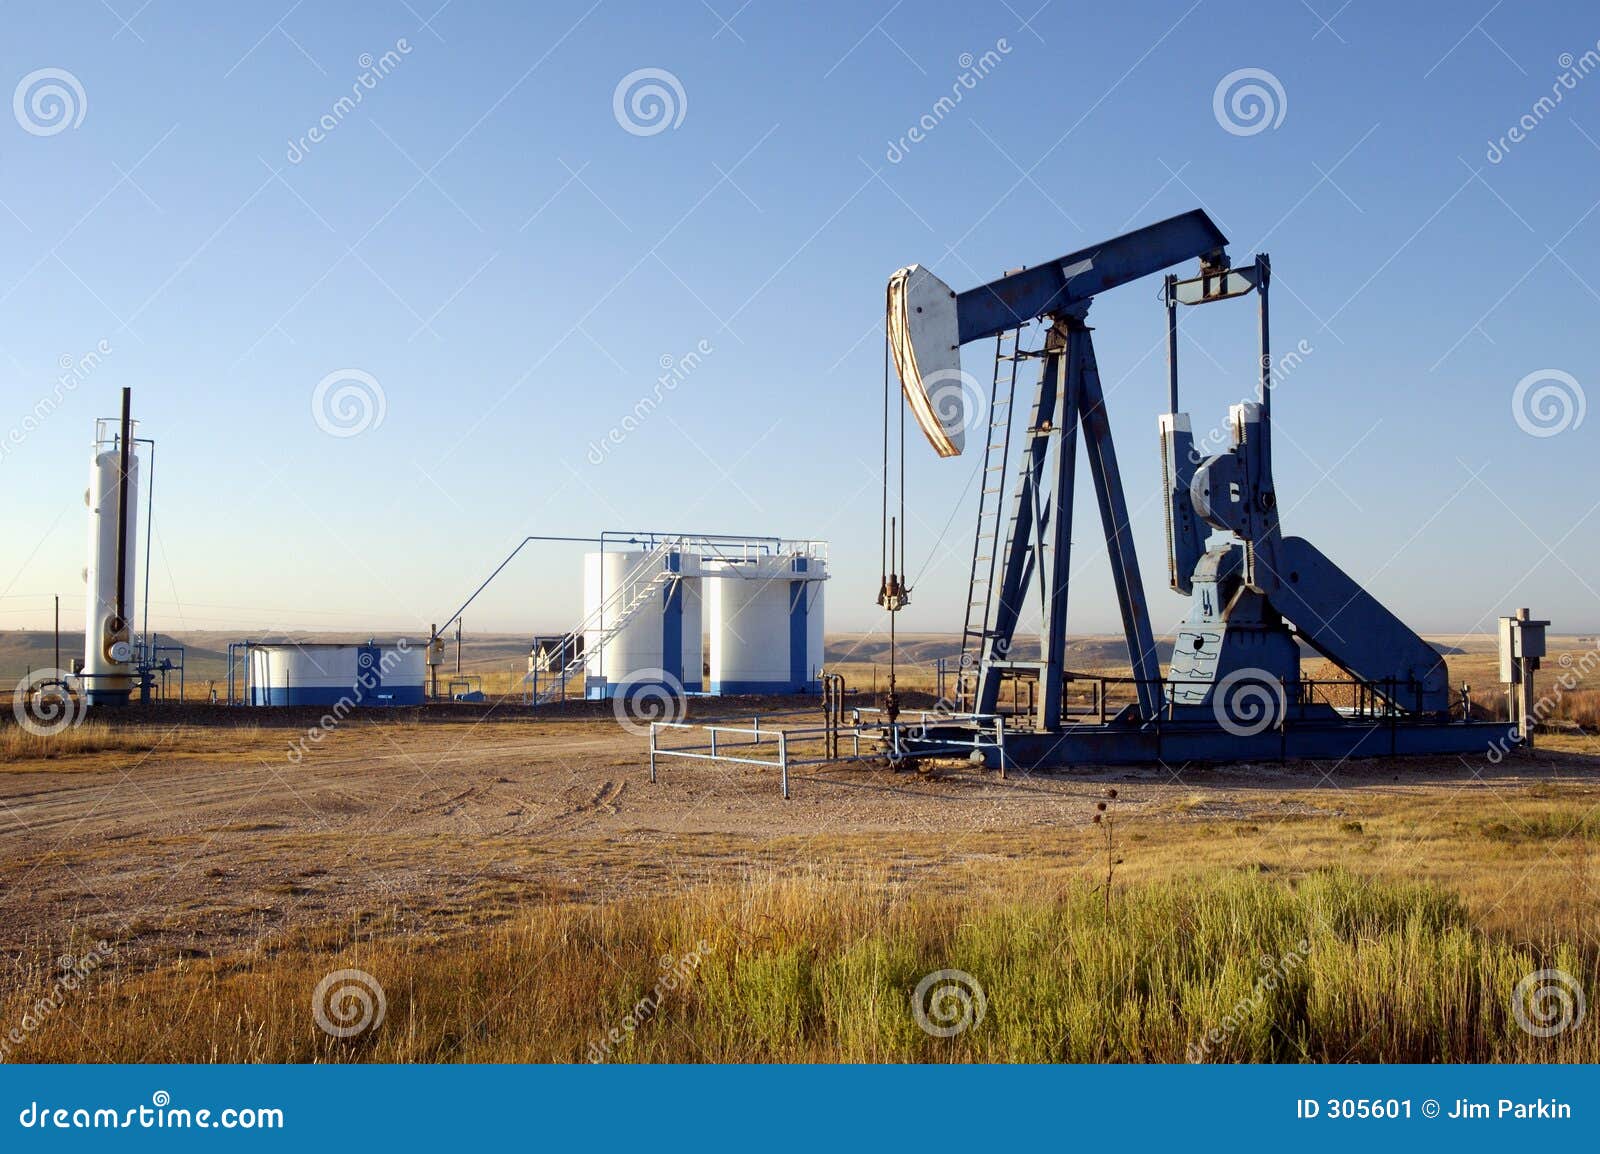 oil well and storage tanks